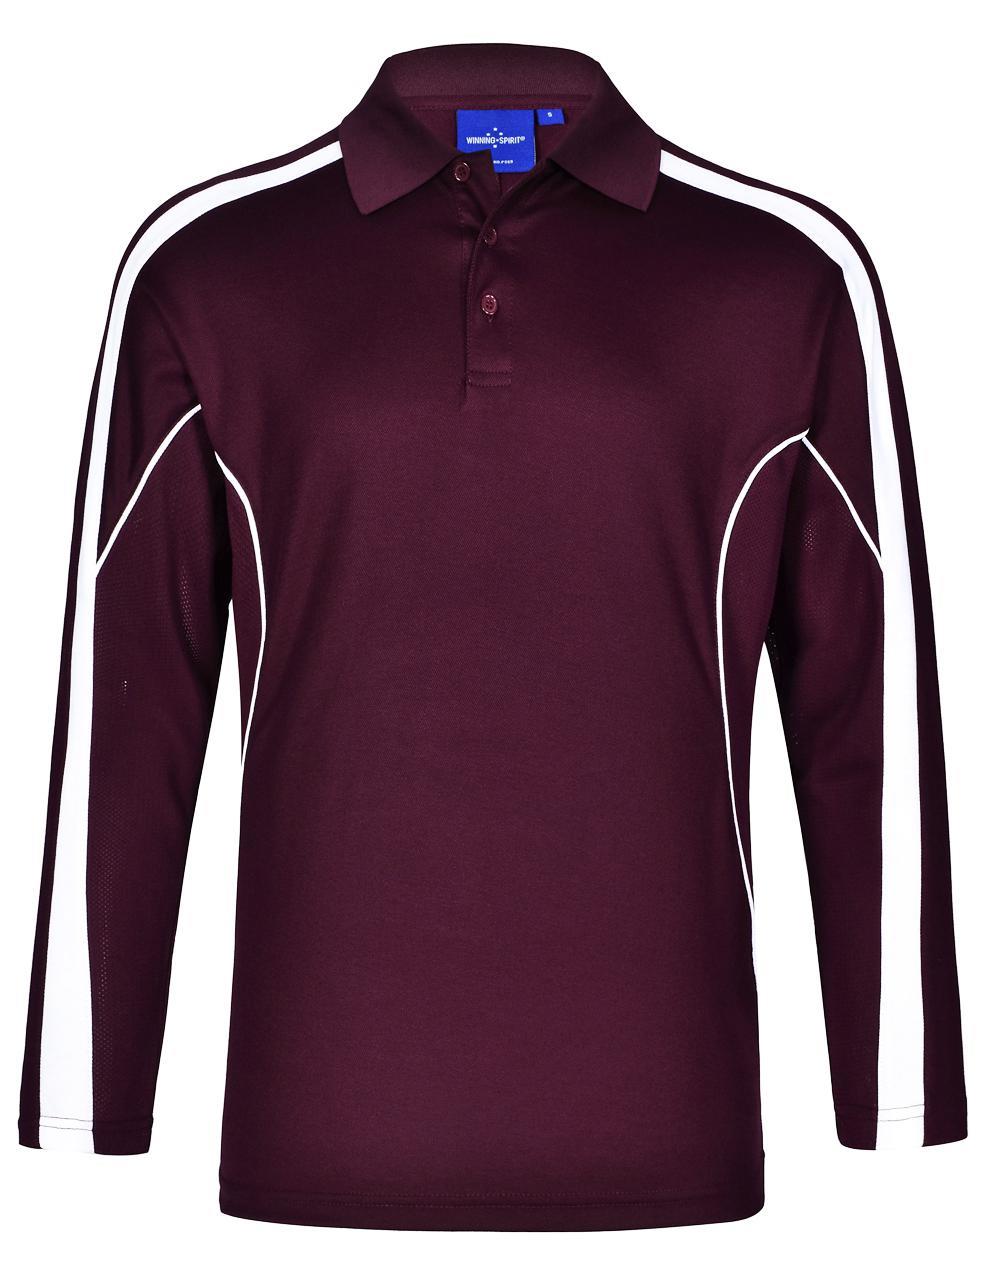 PS69 Sz S Easy Fit LEGEND PLUS Polyester Men's Polo Shirt Maroon/White